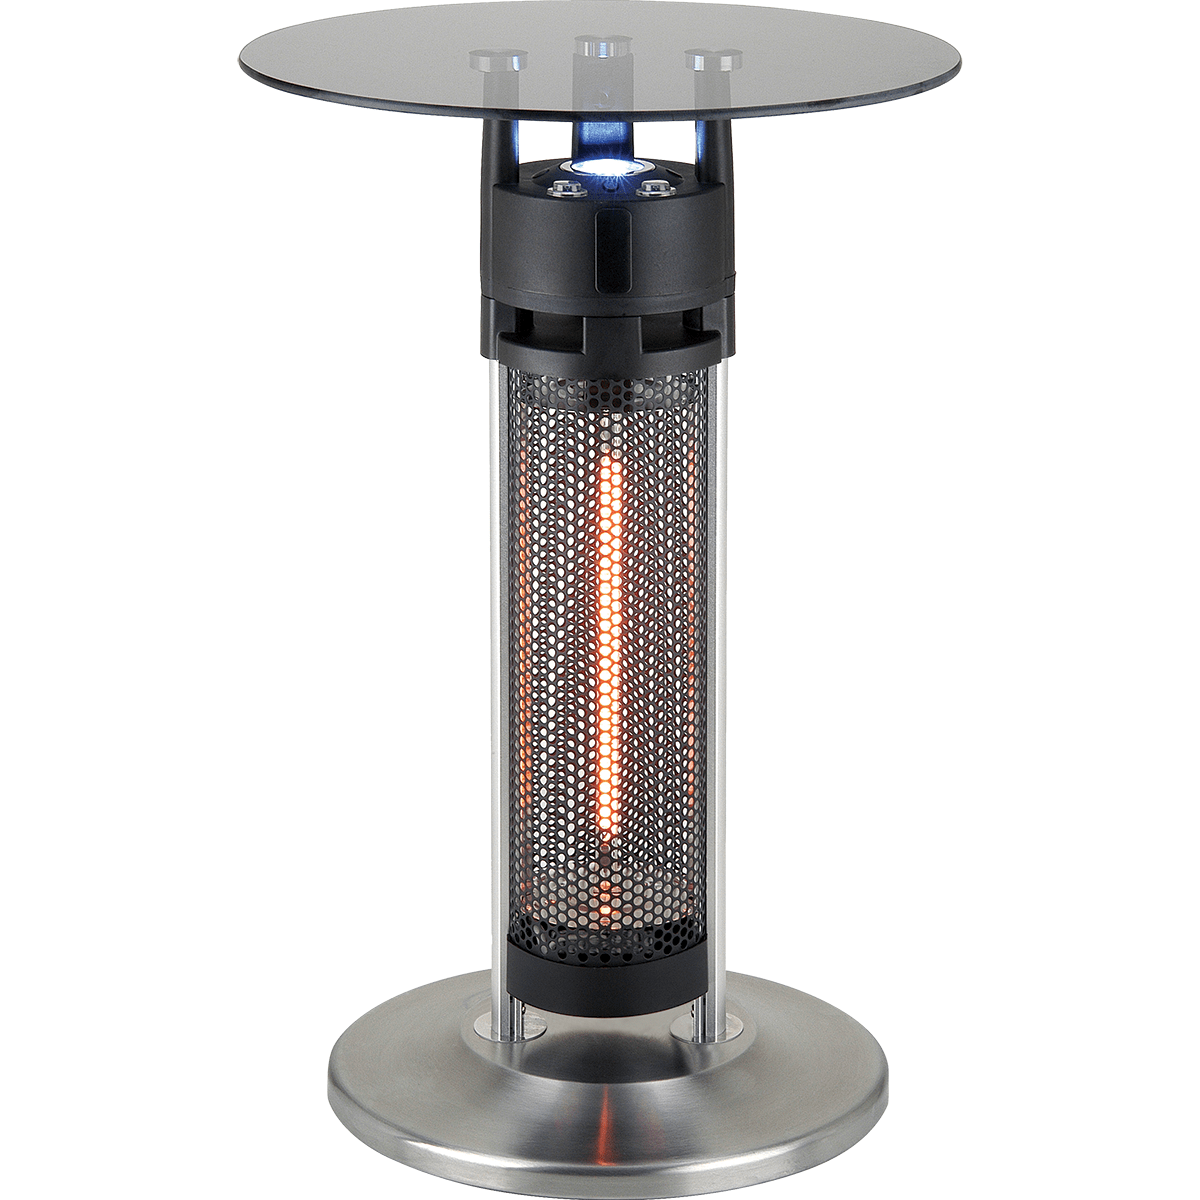 Ener-G+ Circular Bistro-Style Infrared Table Heater